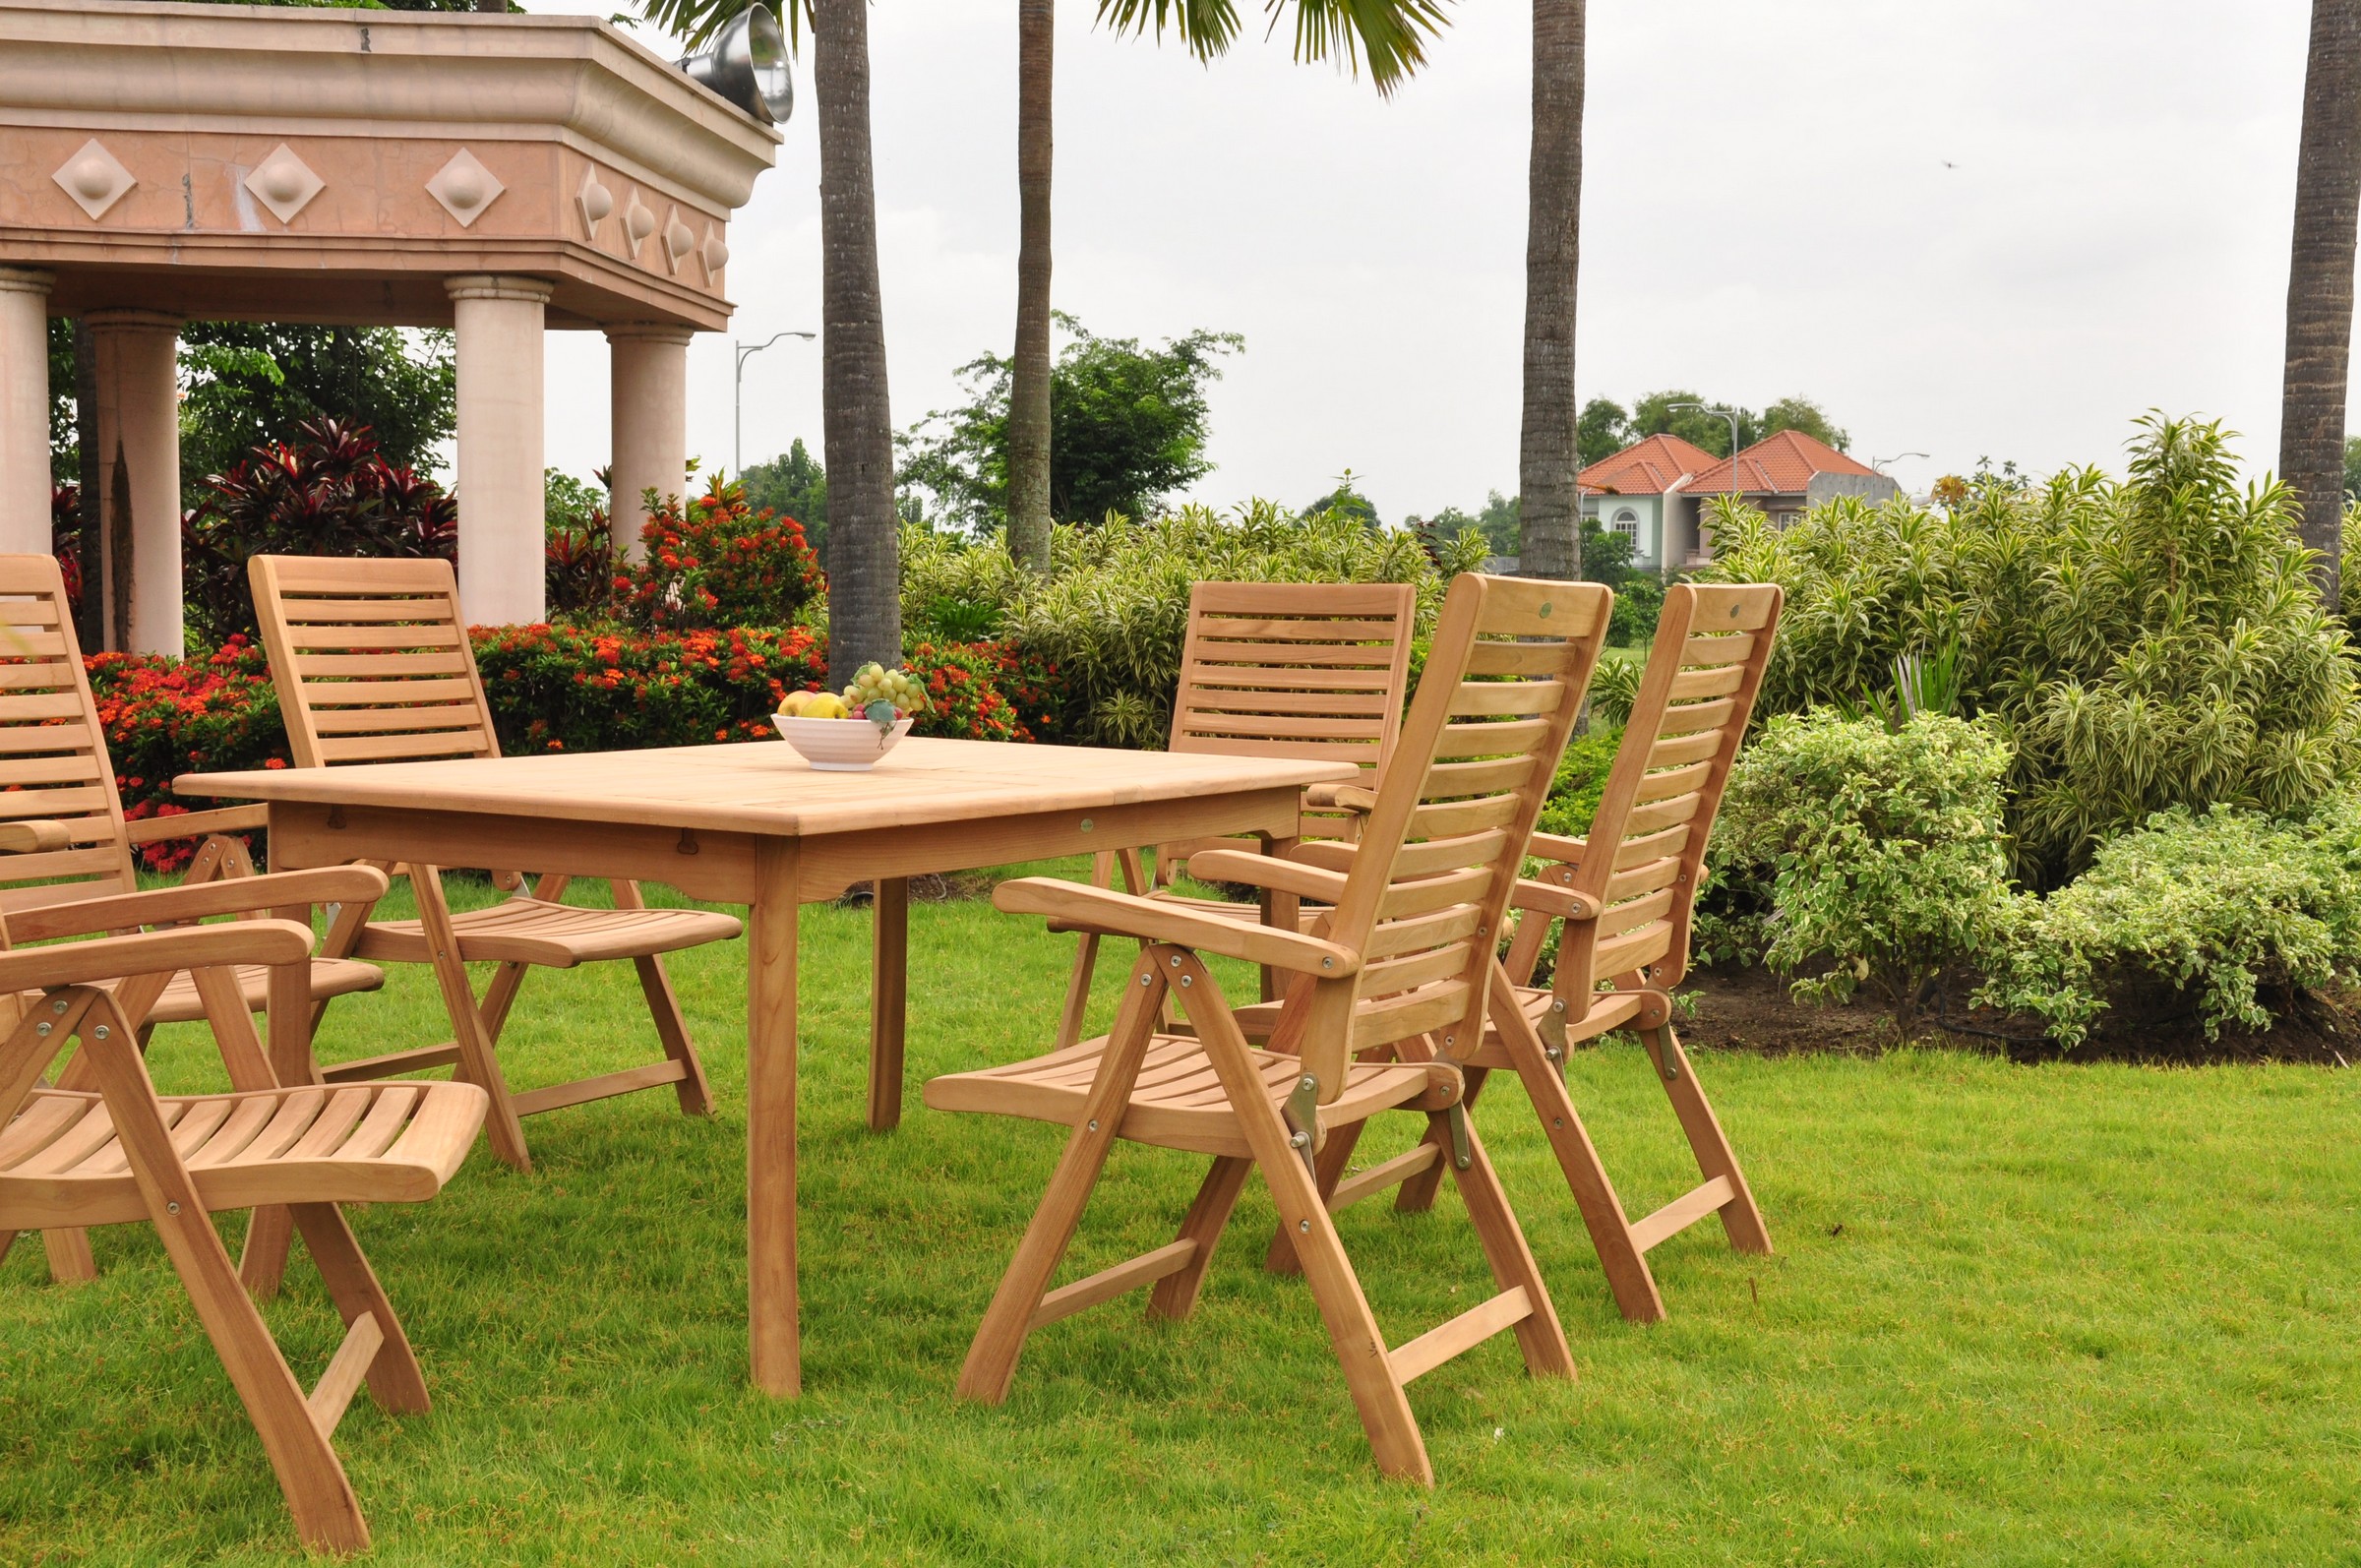 Teak Dining Set:6 Seater 7 Pc - 94" Rectangle Table And 6 Ashley Reclining Arm Chairs Outdoor Patio Grade-A Teak Wood WholesaleTeak #WMDSASa - image 2 of 4